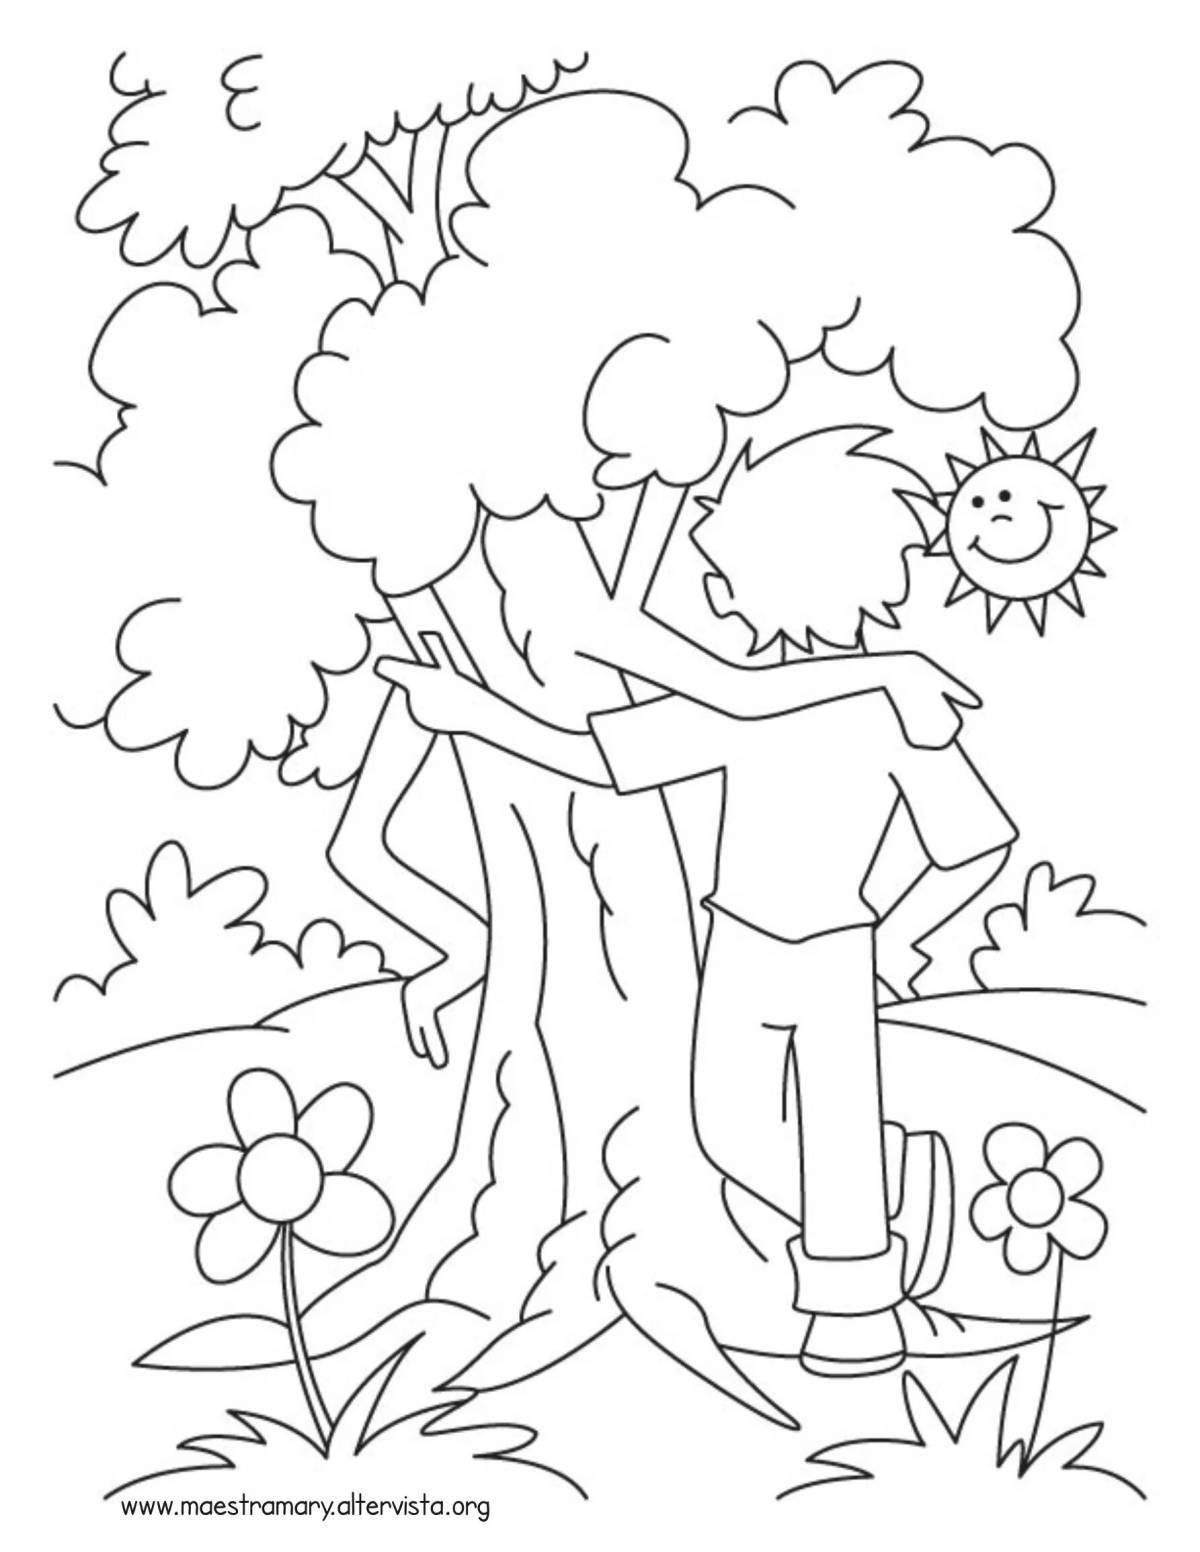 Caring for nature fun coloring book